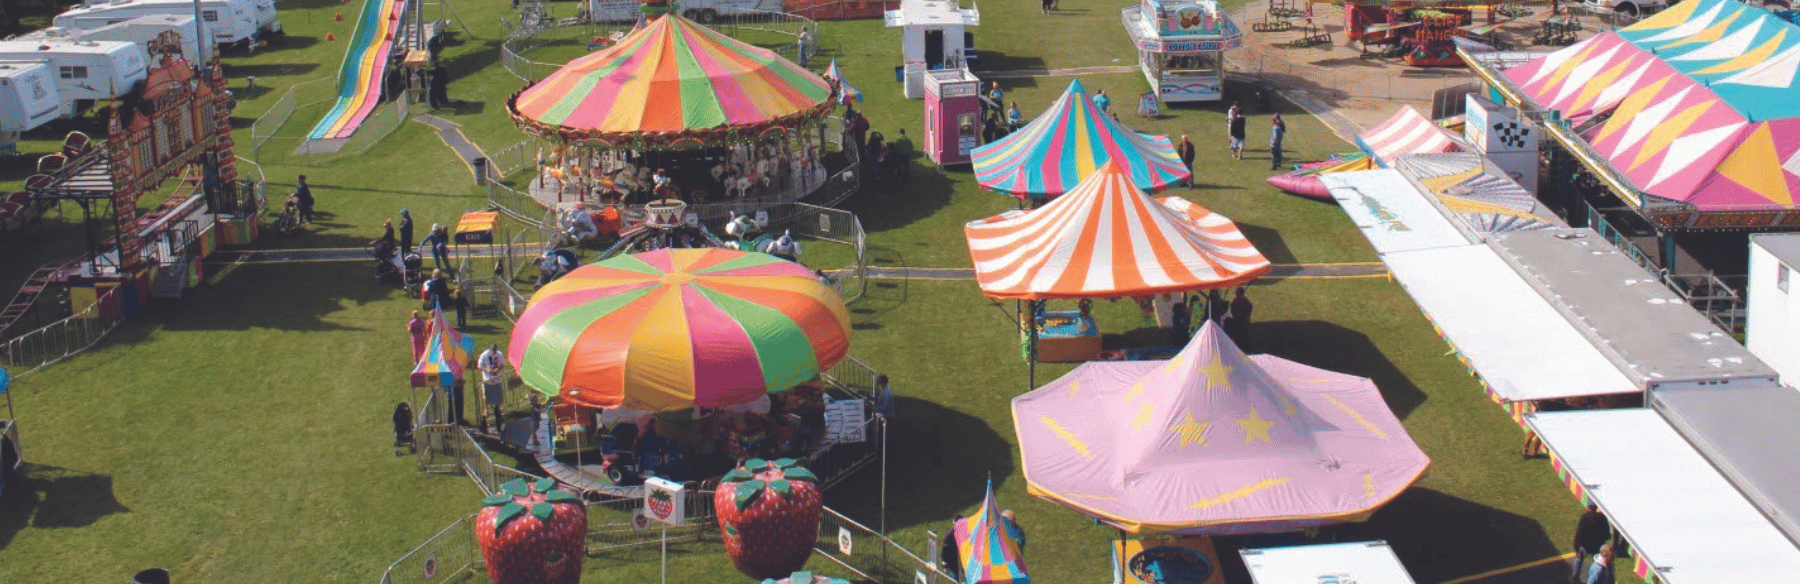 A bunch of fair rides and events with colourful tents 